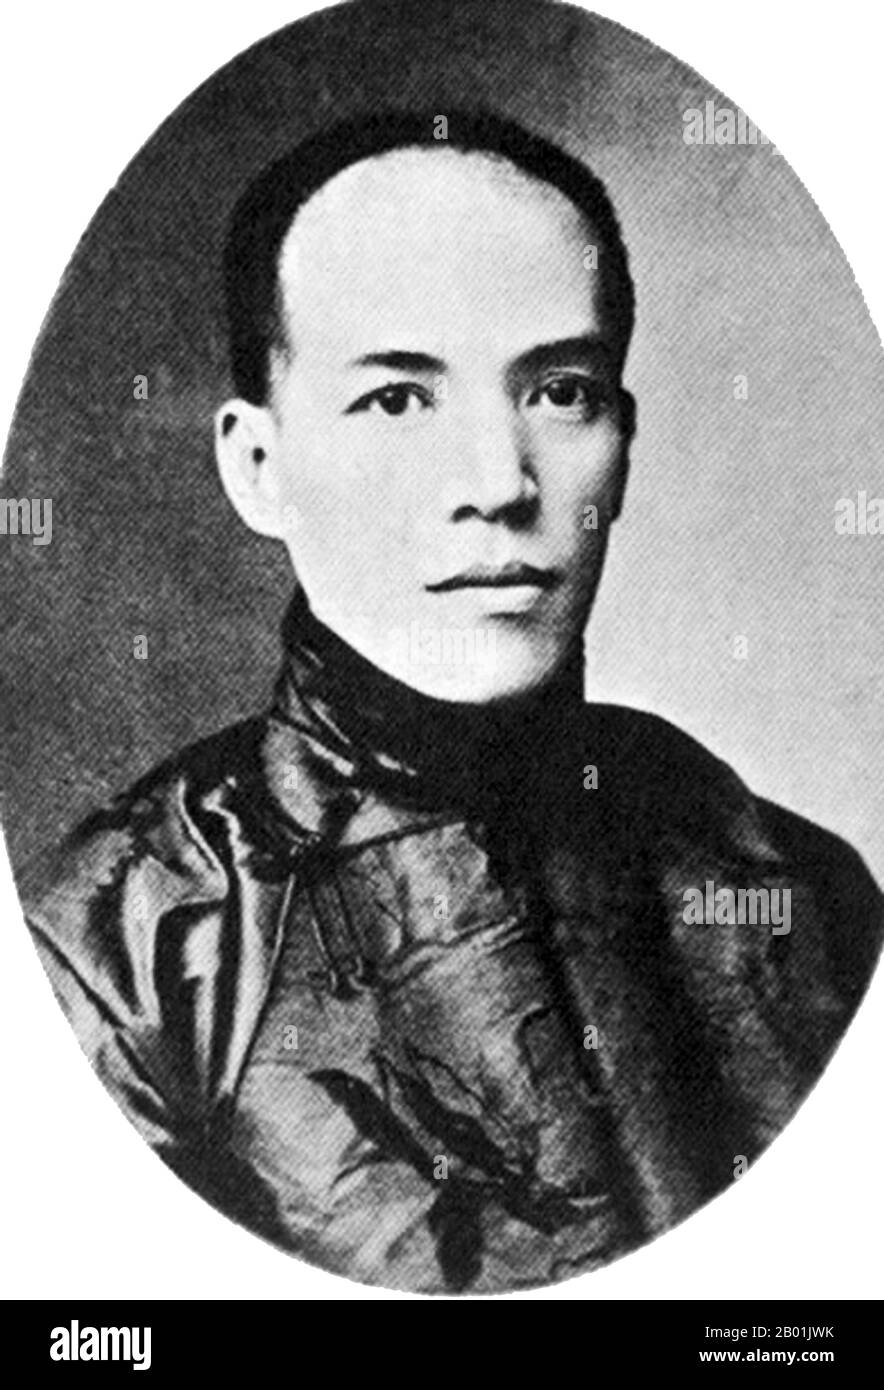 China: Liang Qichao (23 February 1873 - 19 January 1929), Chinese scholar, journalist and philosopher, c. 1917.  Liang Qichao was a Chinese scholar, journalist, philosopher and reformist during the Qing Dynasty (1644-1911), who inspired Chinese scholars with his writings and reform movements. He died of illness in Beijing at the age of 55.  As an advocate of constitutional monarchy, Liang was unhappy with the governance of the Qing Government and wanted to change the status quo in China. He organised reforms with Kang Youwei by putting their ideas on paper and sending them to Emperor Guangxu. Stock Photo